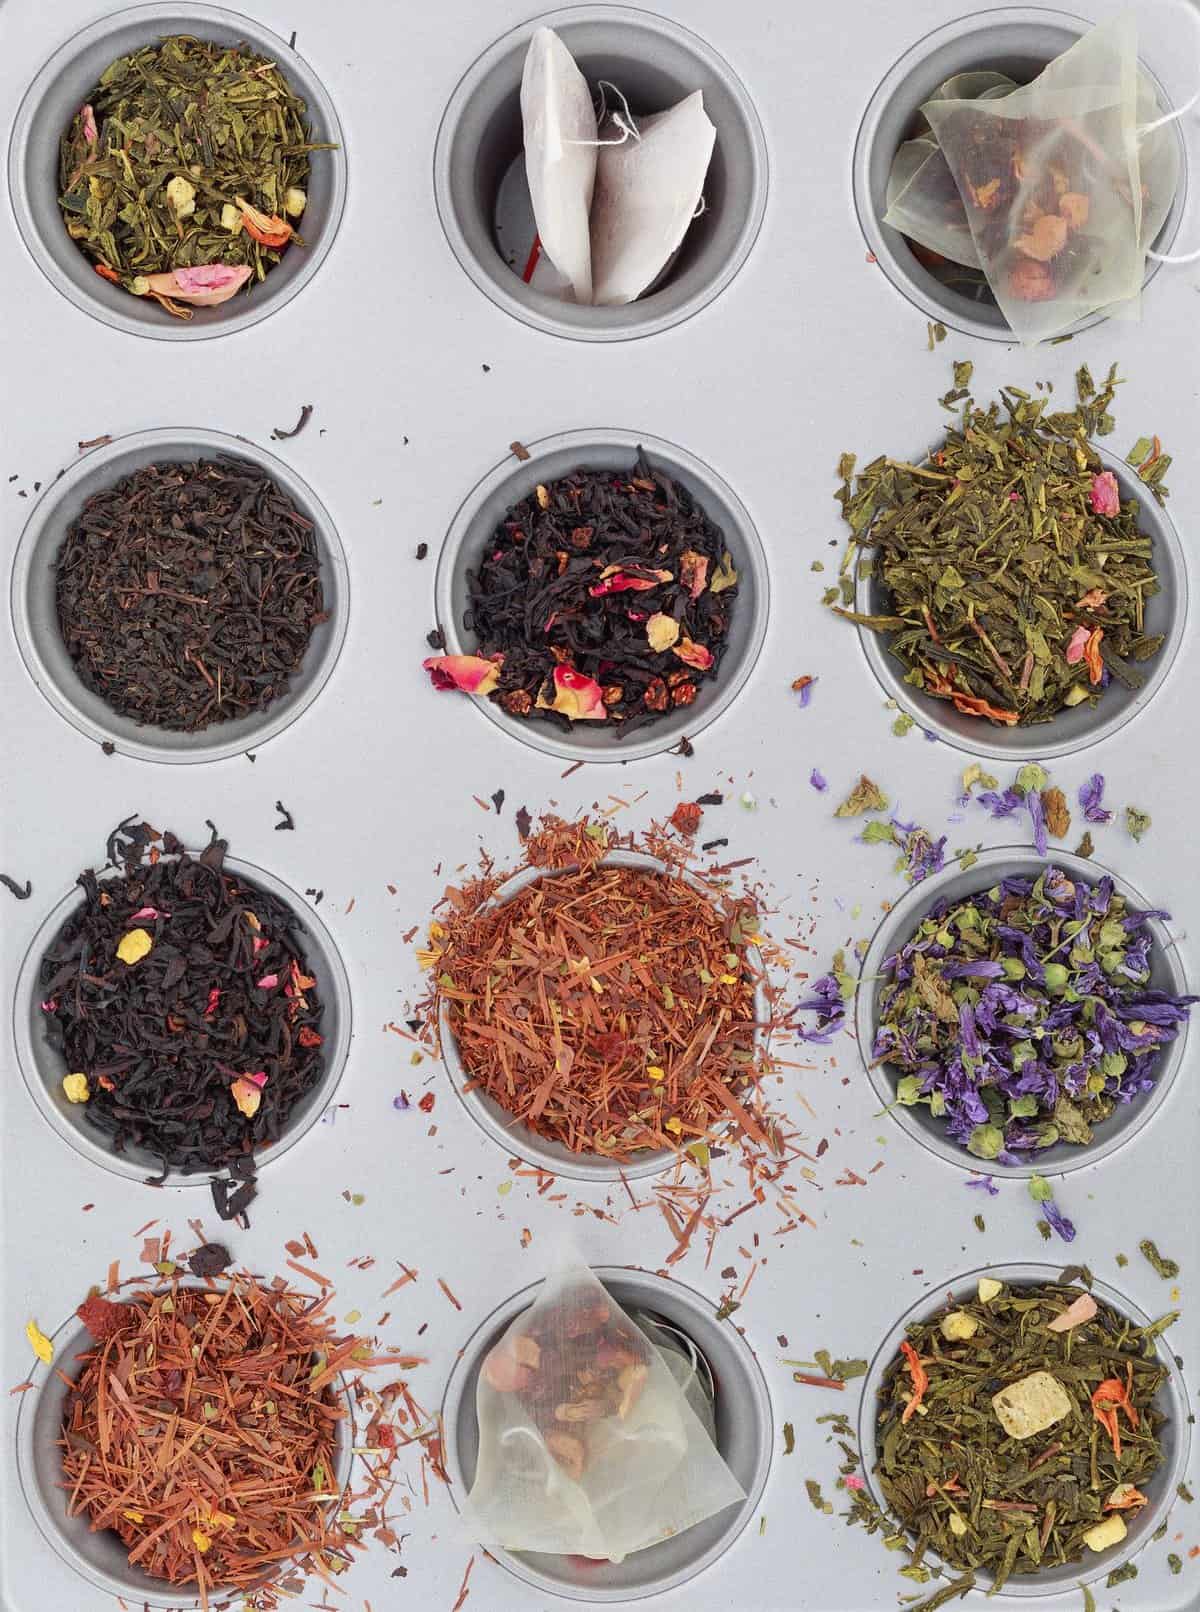  Powerful Teas You Need to Try